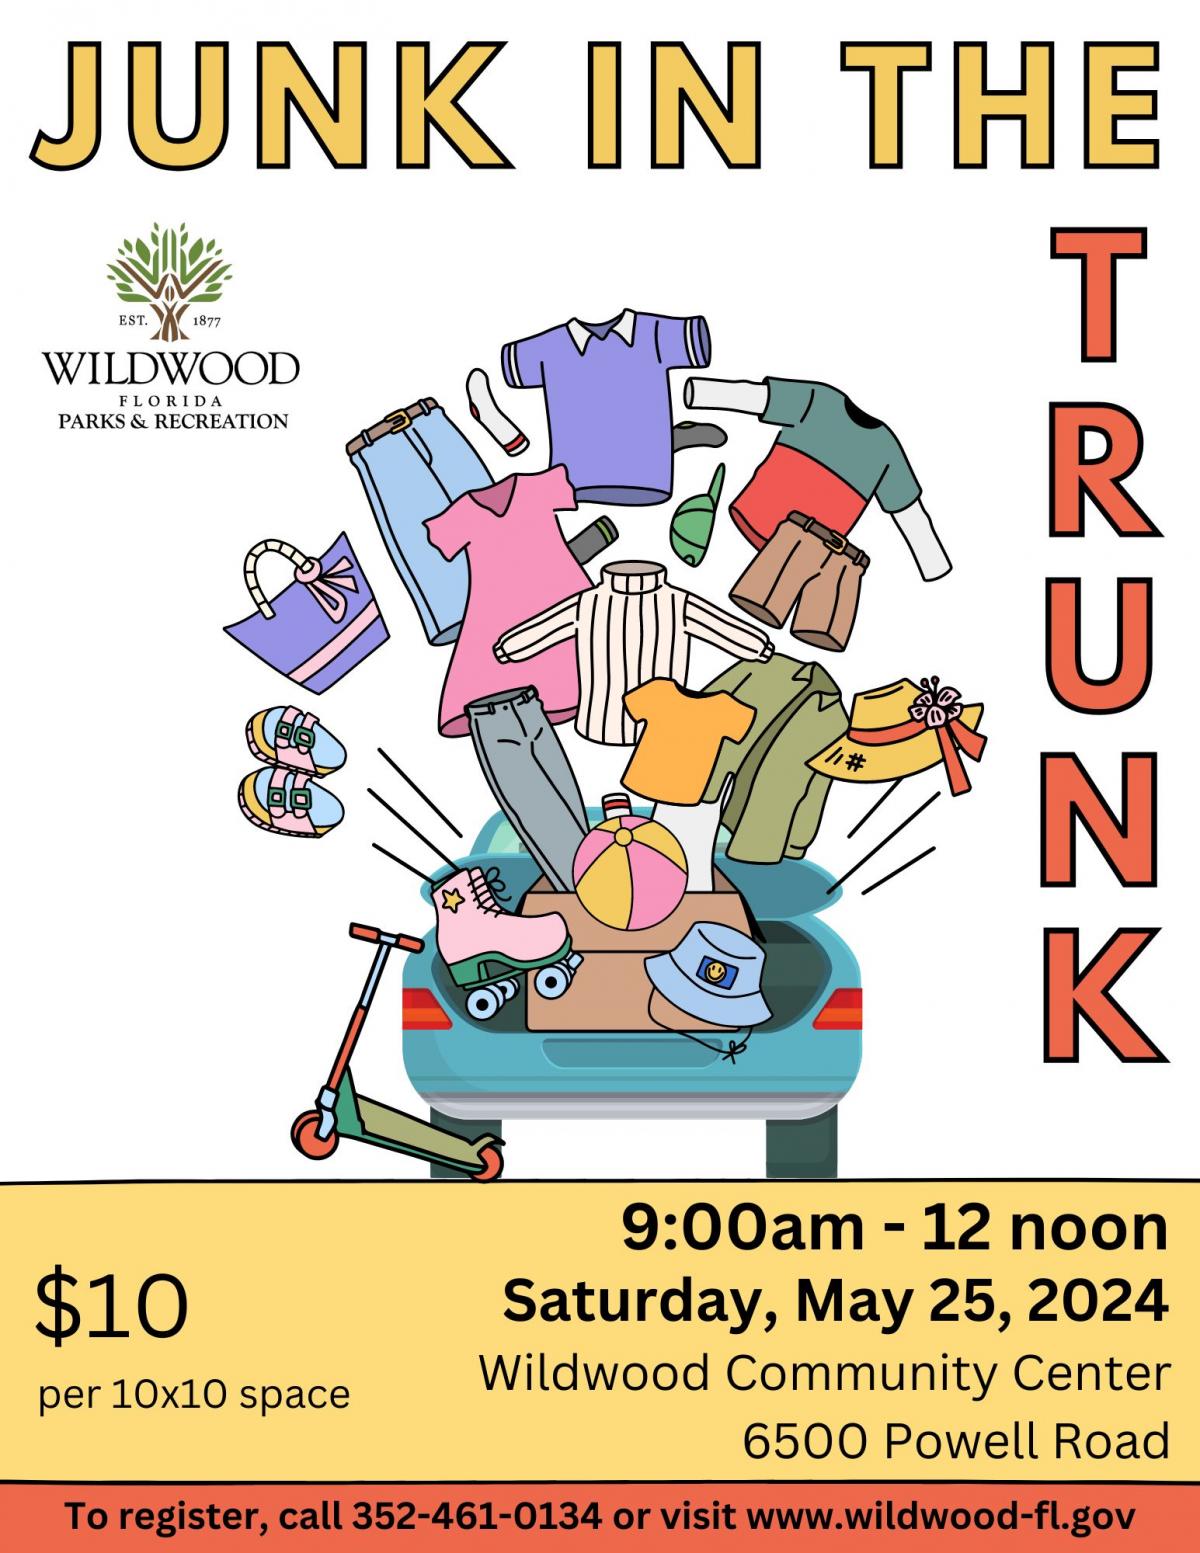 Wildwood Parks & Recreation "Junk In The Trunk" Event Saturday, May 25, 2024, 9am-12pm, Wildwood Community Center